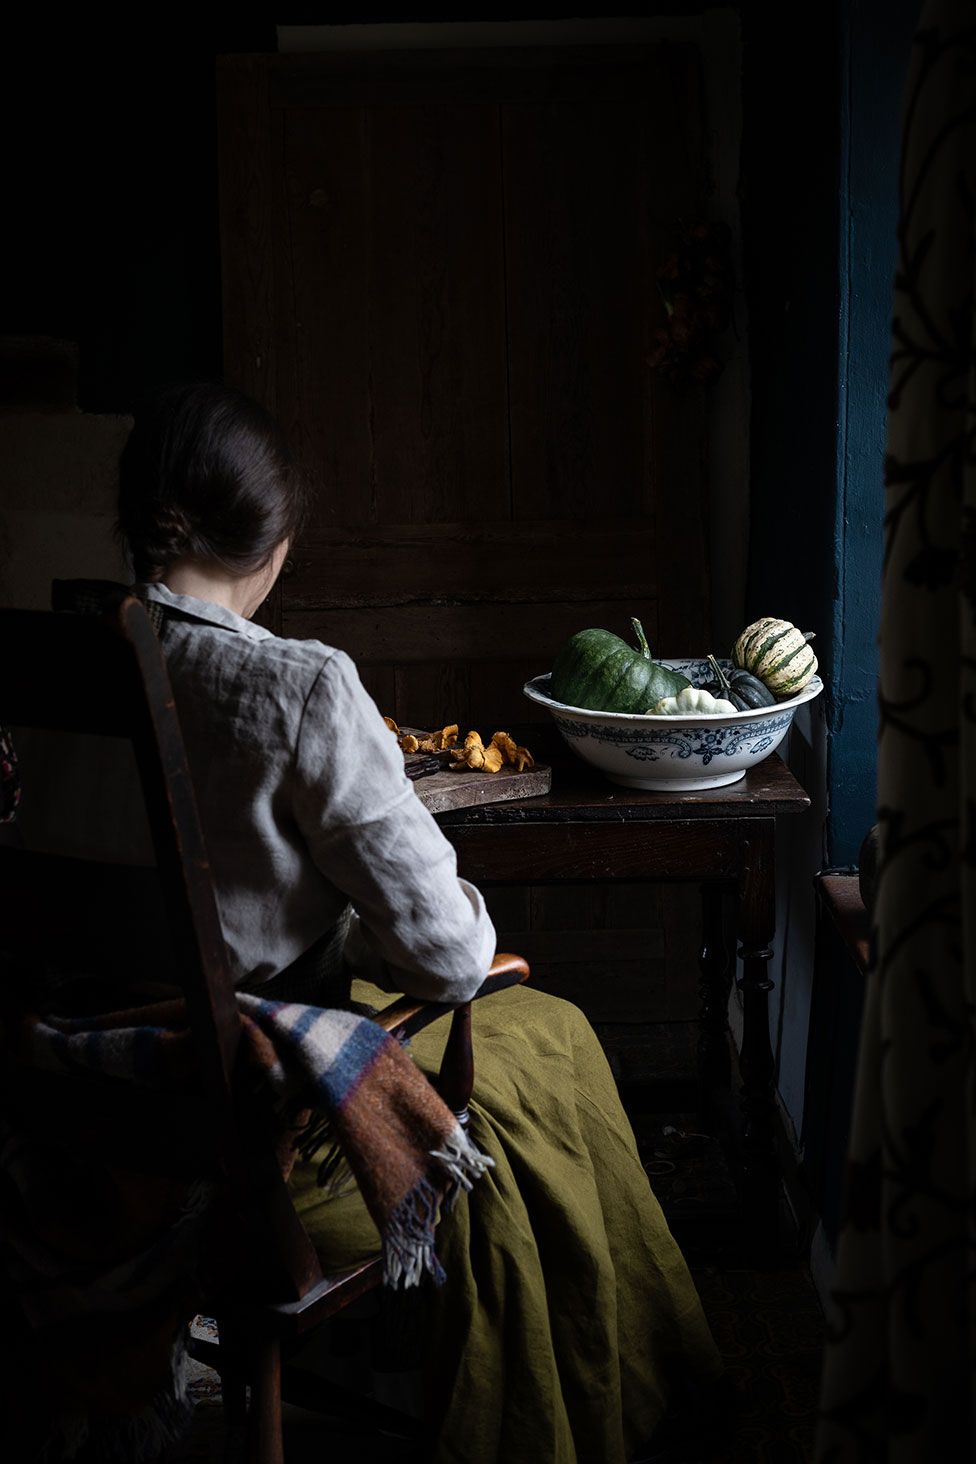 A woman sits at a table with a bowl of squash in front of her